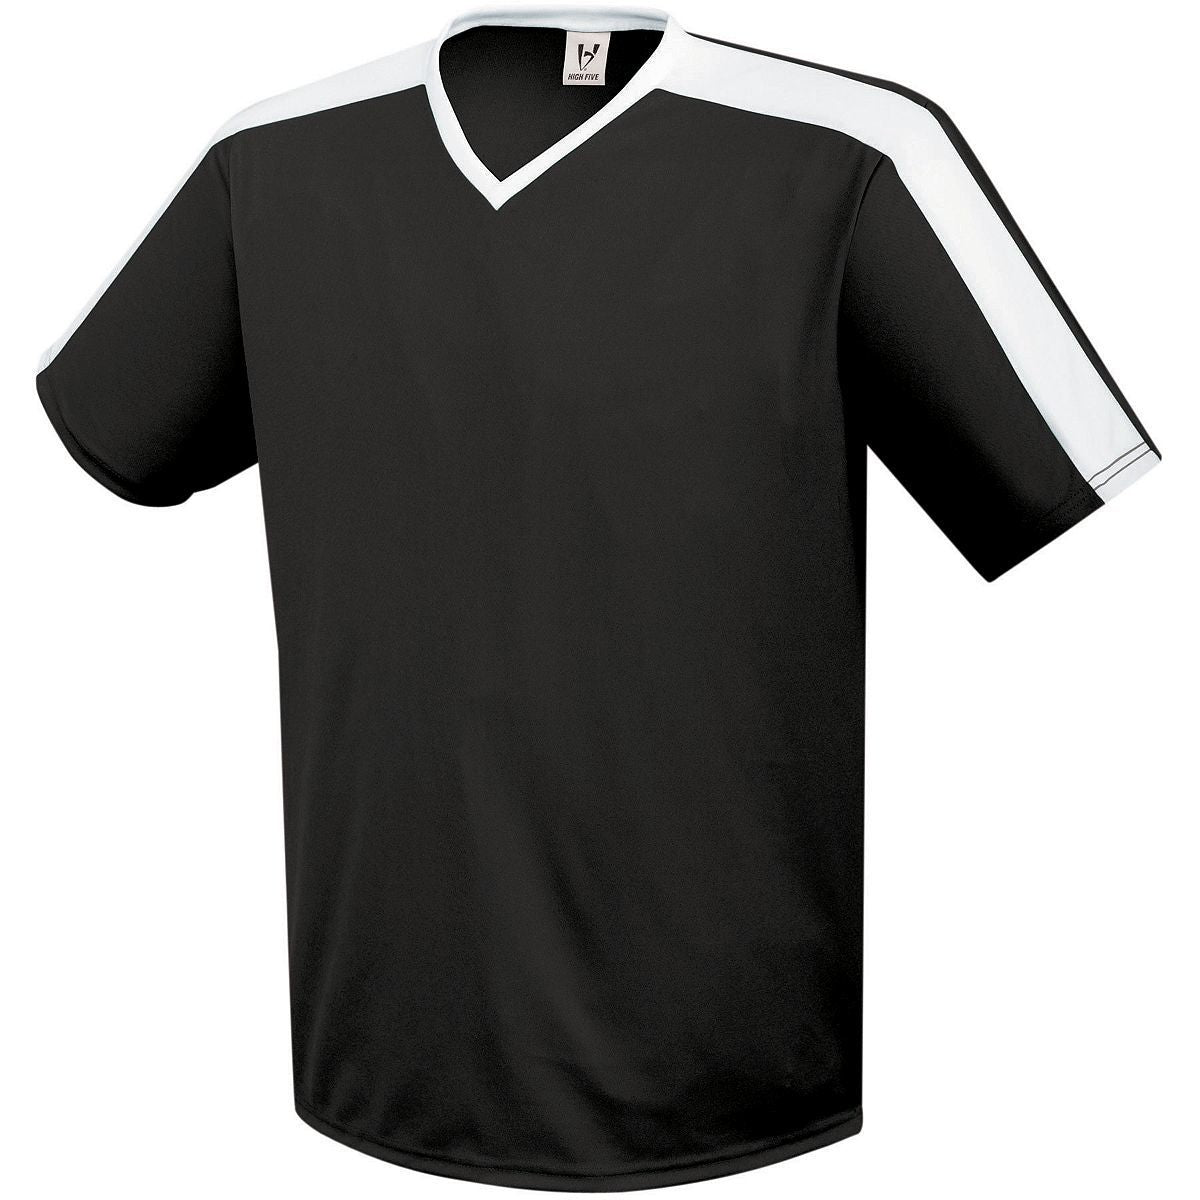 High 5 Youth Genesis Soccer Jersey